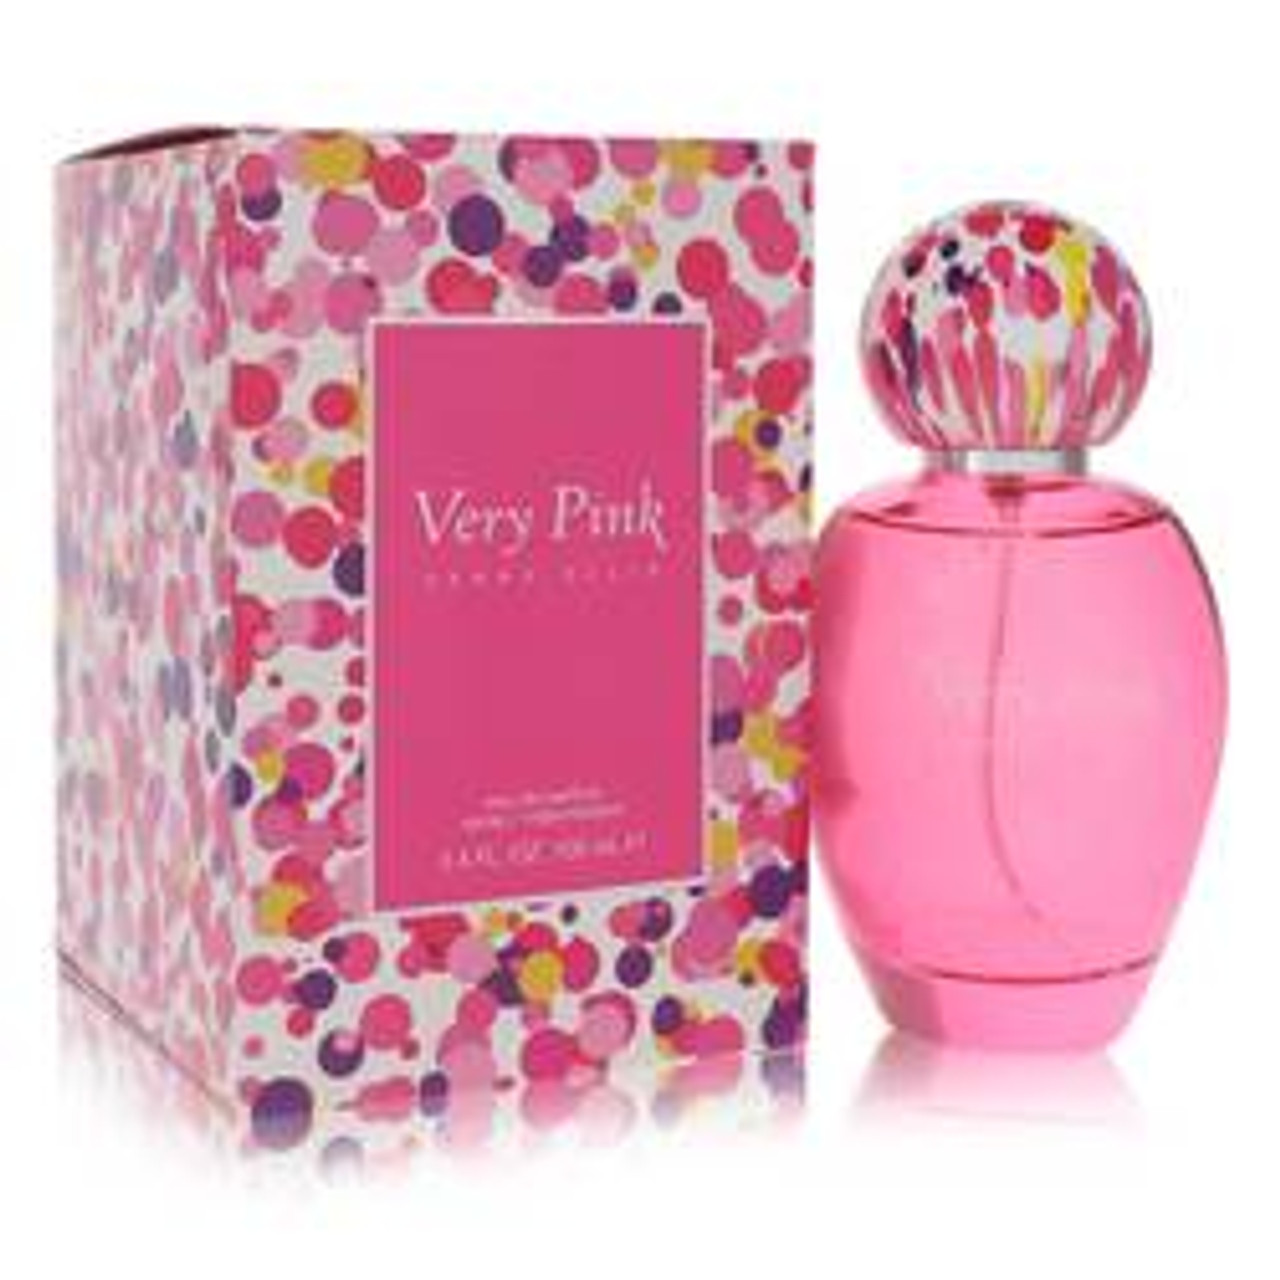 Perry Ellis Very Pink Perfume By Perry Ellis Eau De Parfum Spray 3.4 oz for Women - [From 92.00 - Choose pk Qty ] - *Ships from Miami